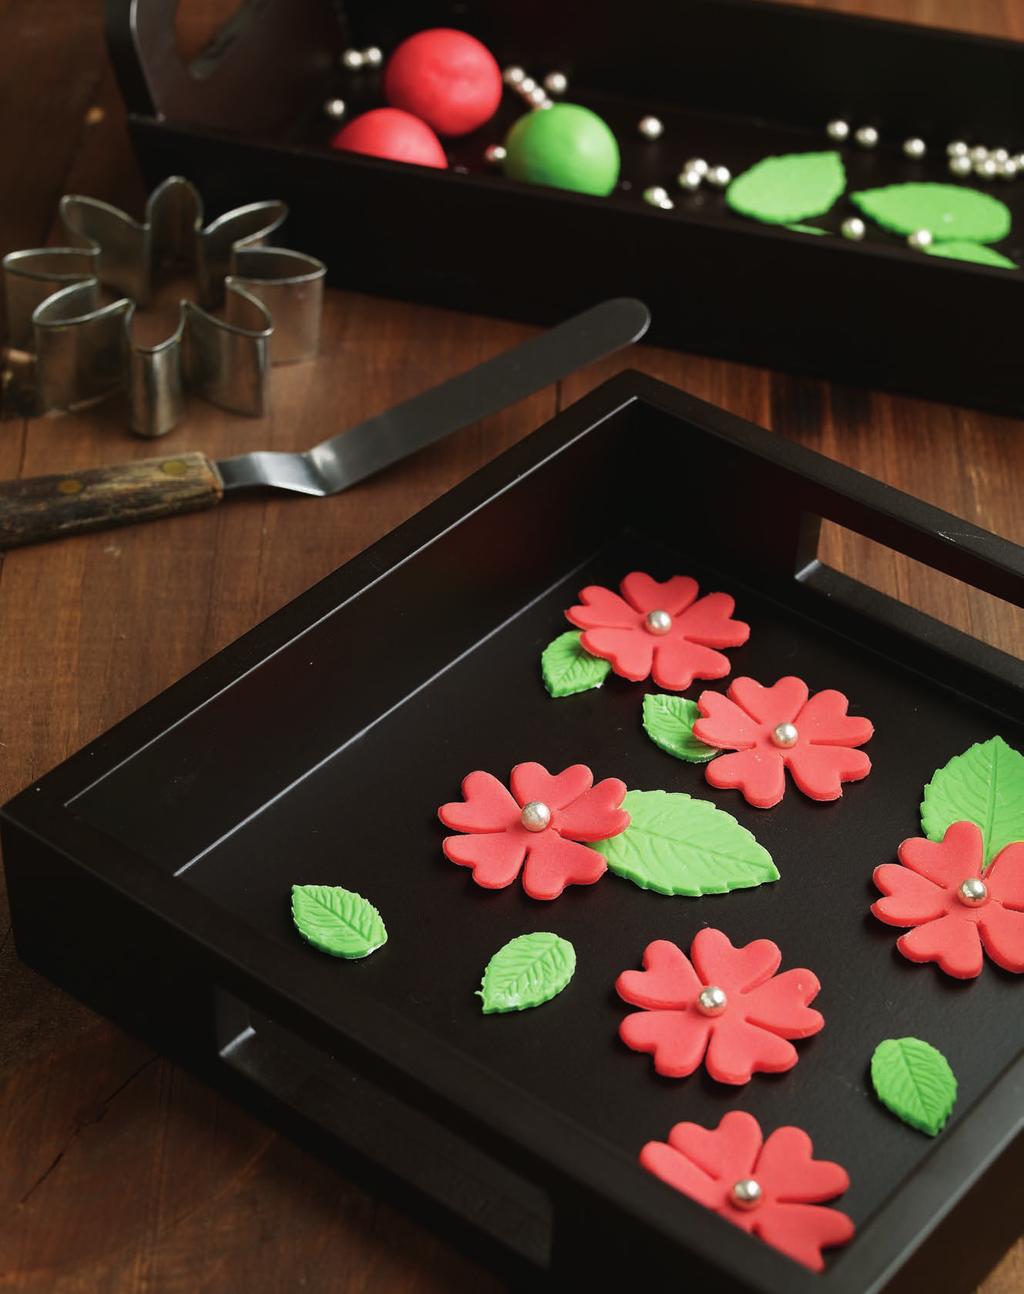 You can colour, flavour or form marzipan into different candies as